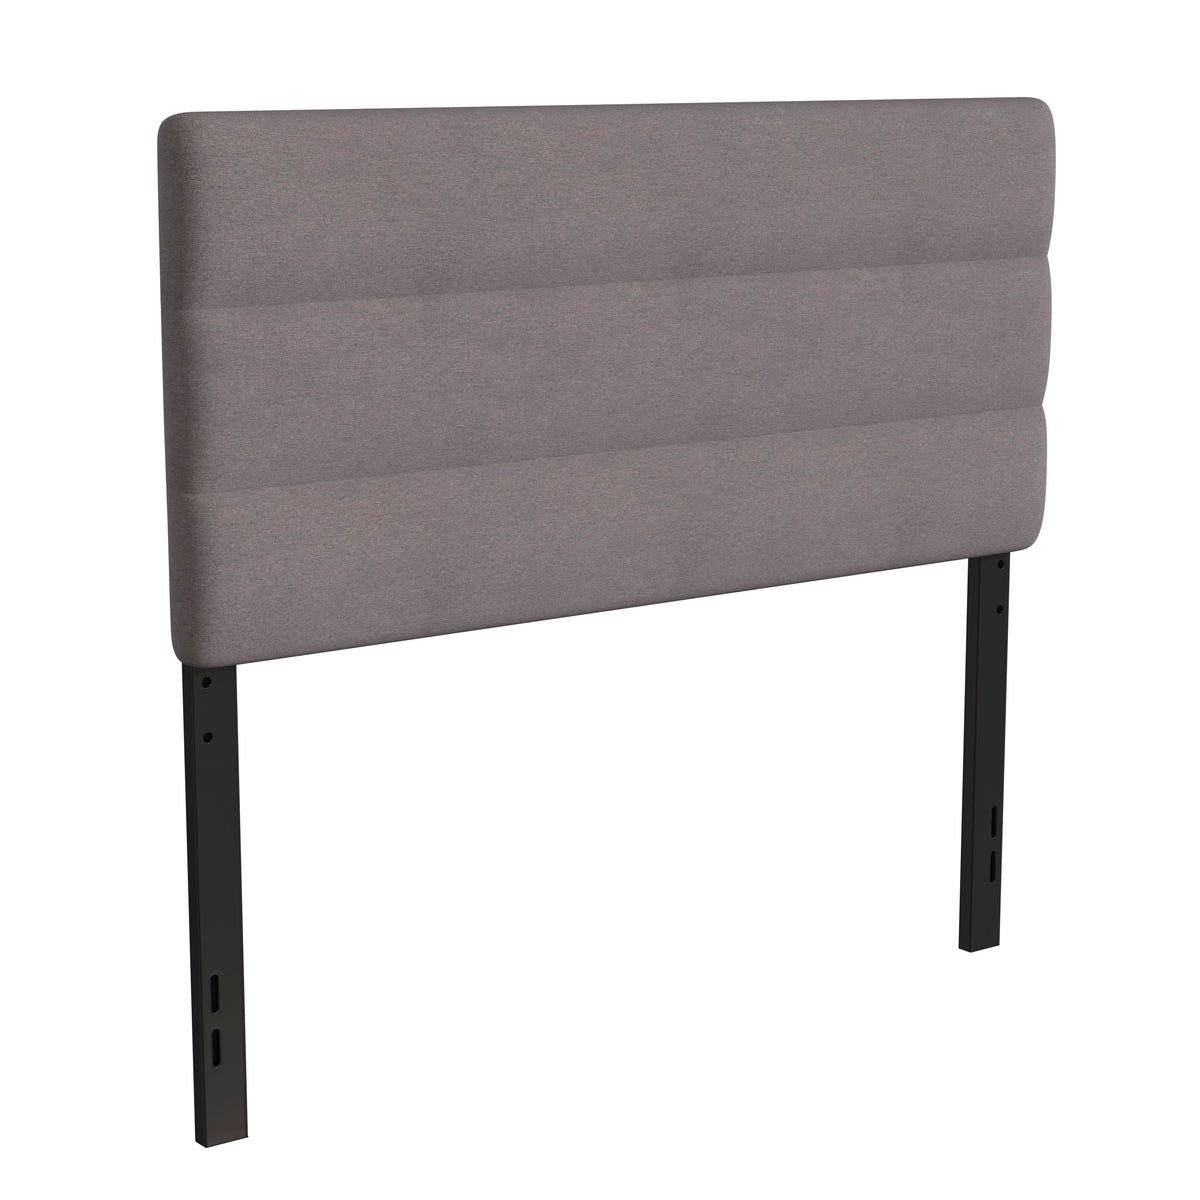 Gray,Full |#| Universal Fit Tufted Upholstered Headboard in Gray Fabric - Full